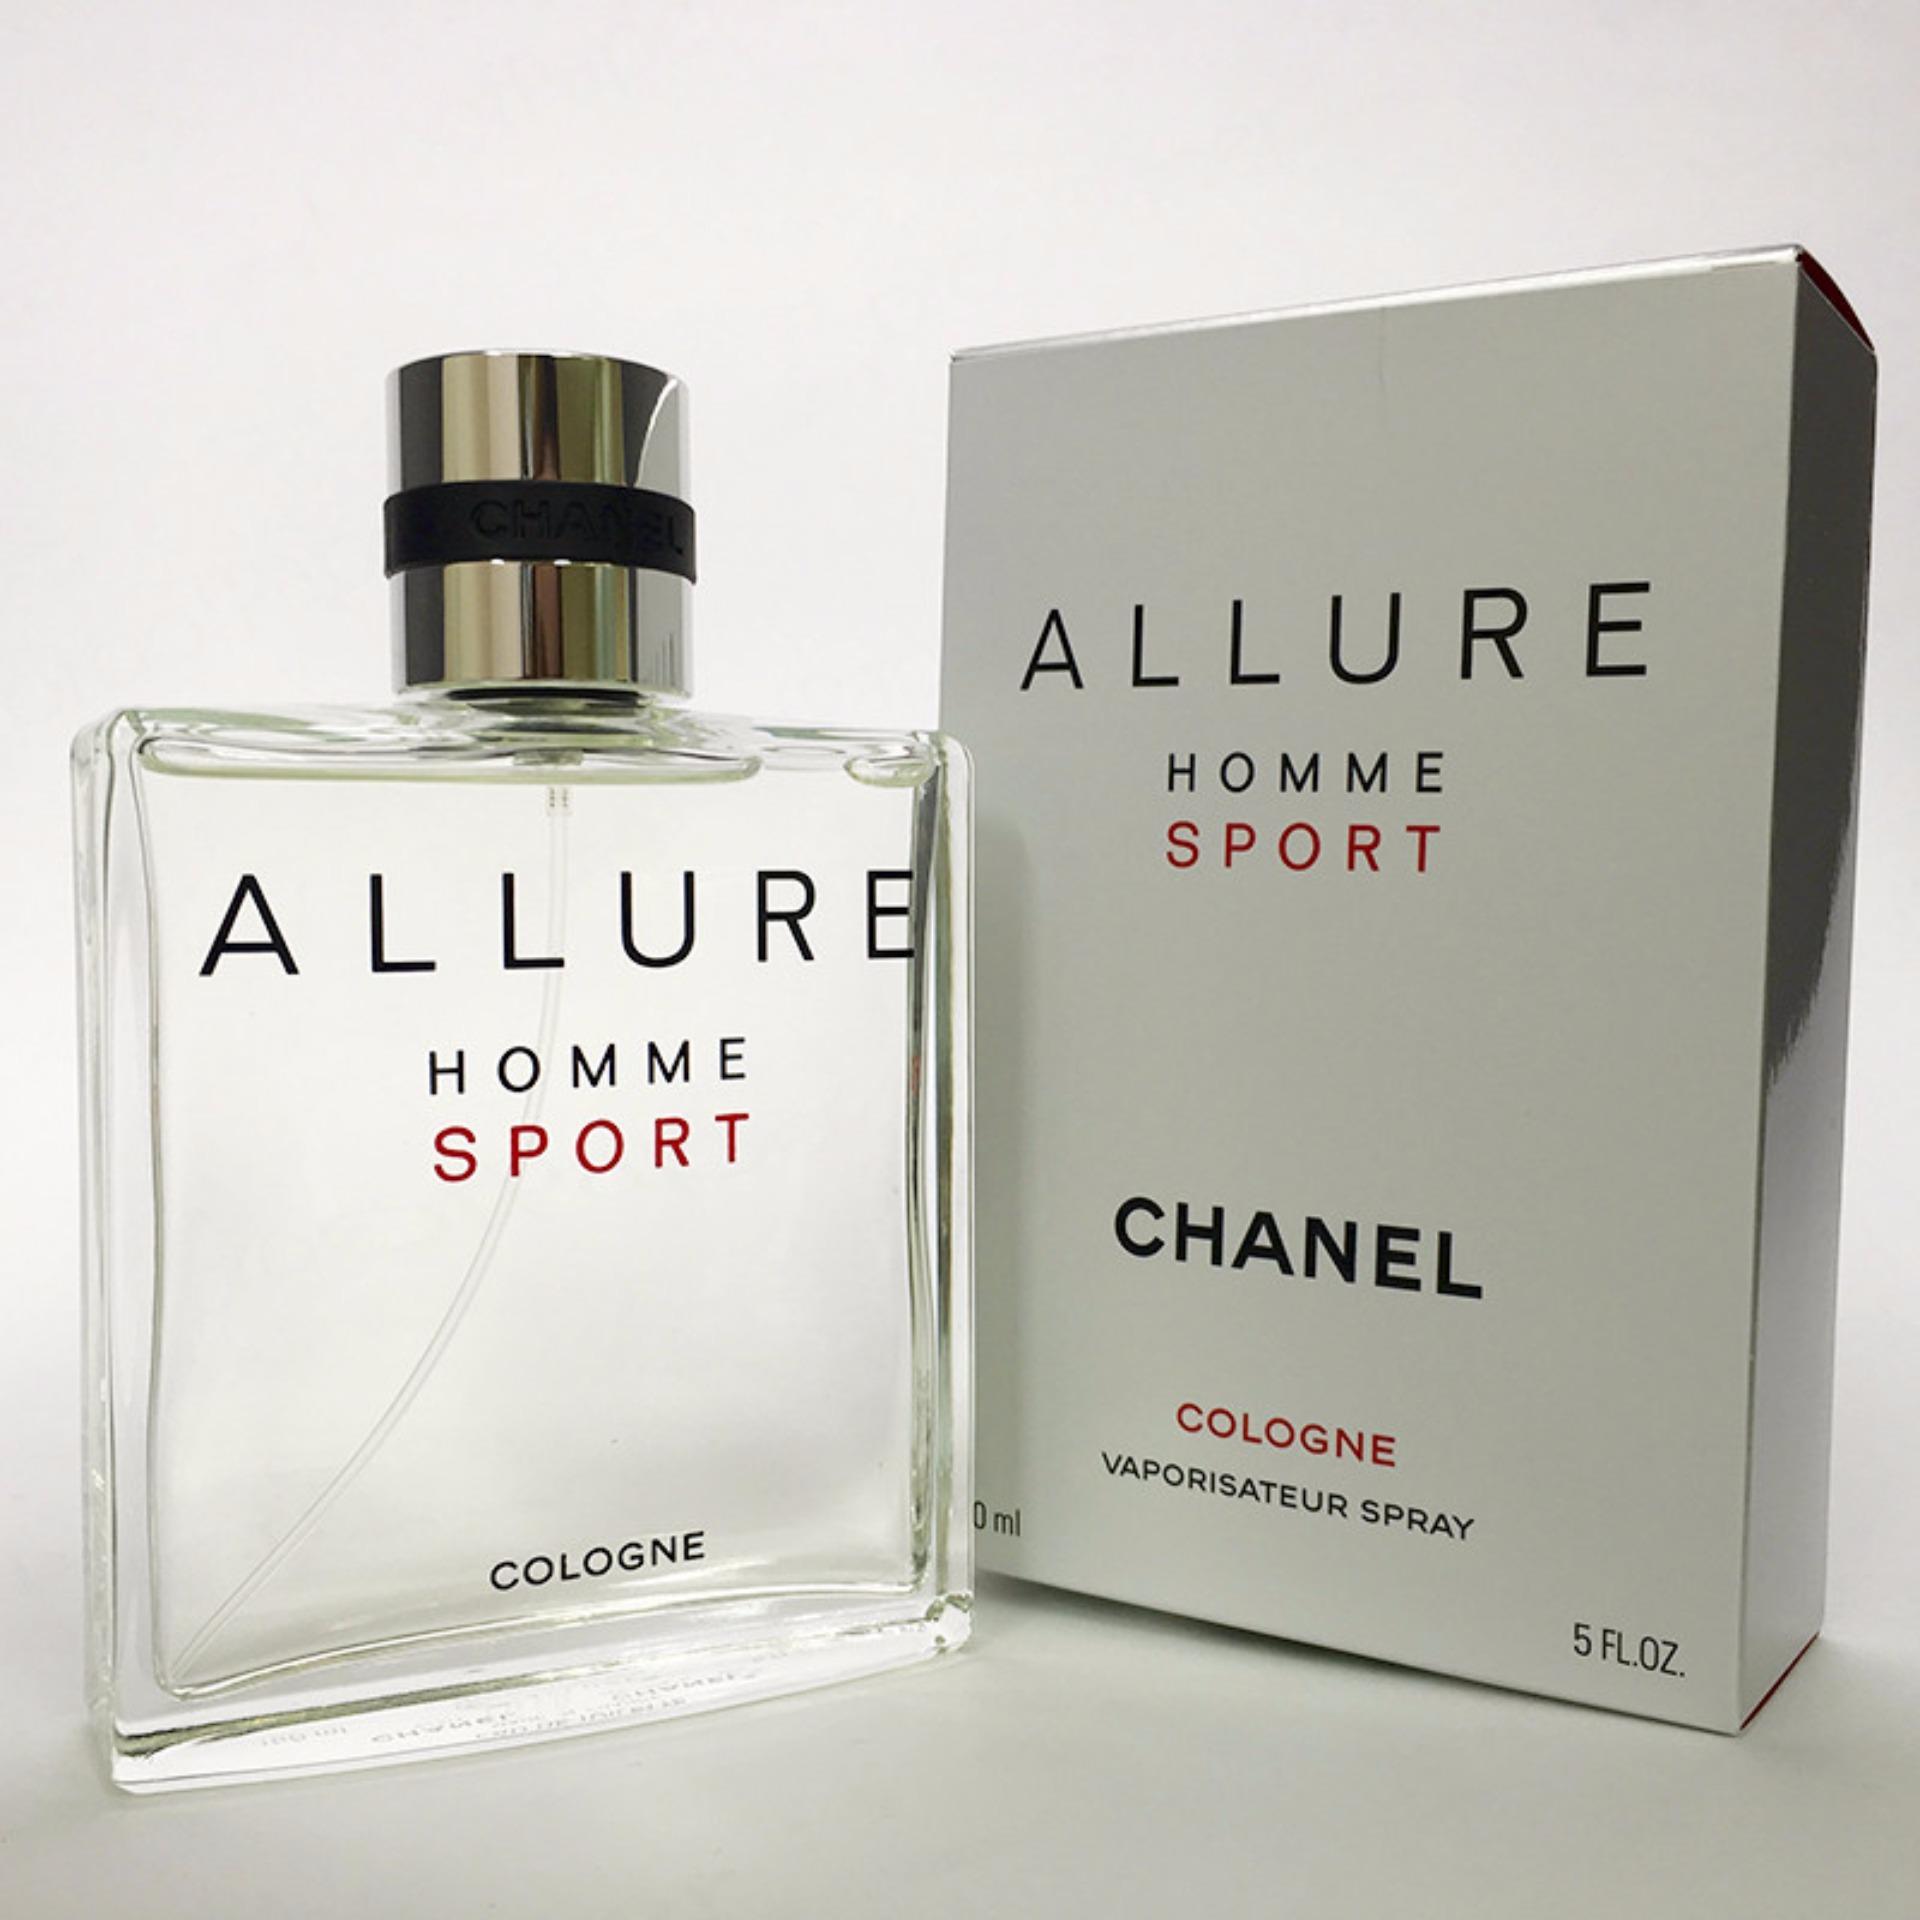 Amazoncom  Chanel Allure Homme Sport Cologne Spray for Men 5 oz  Beauty   Personal Care